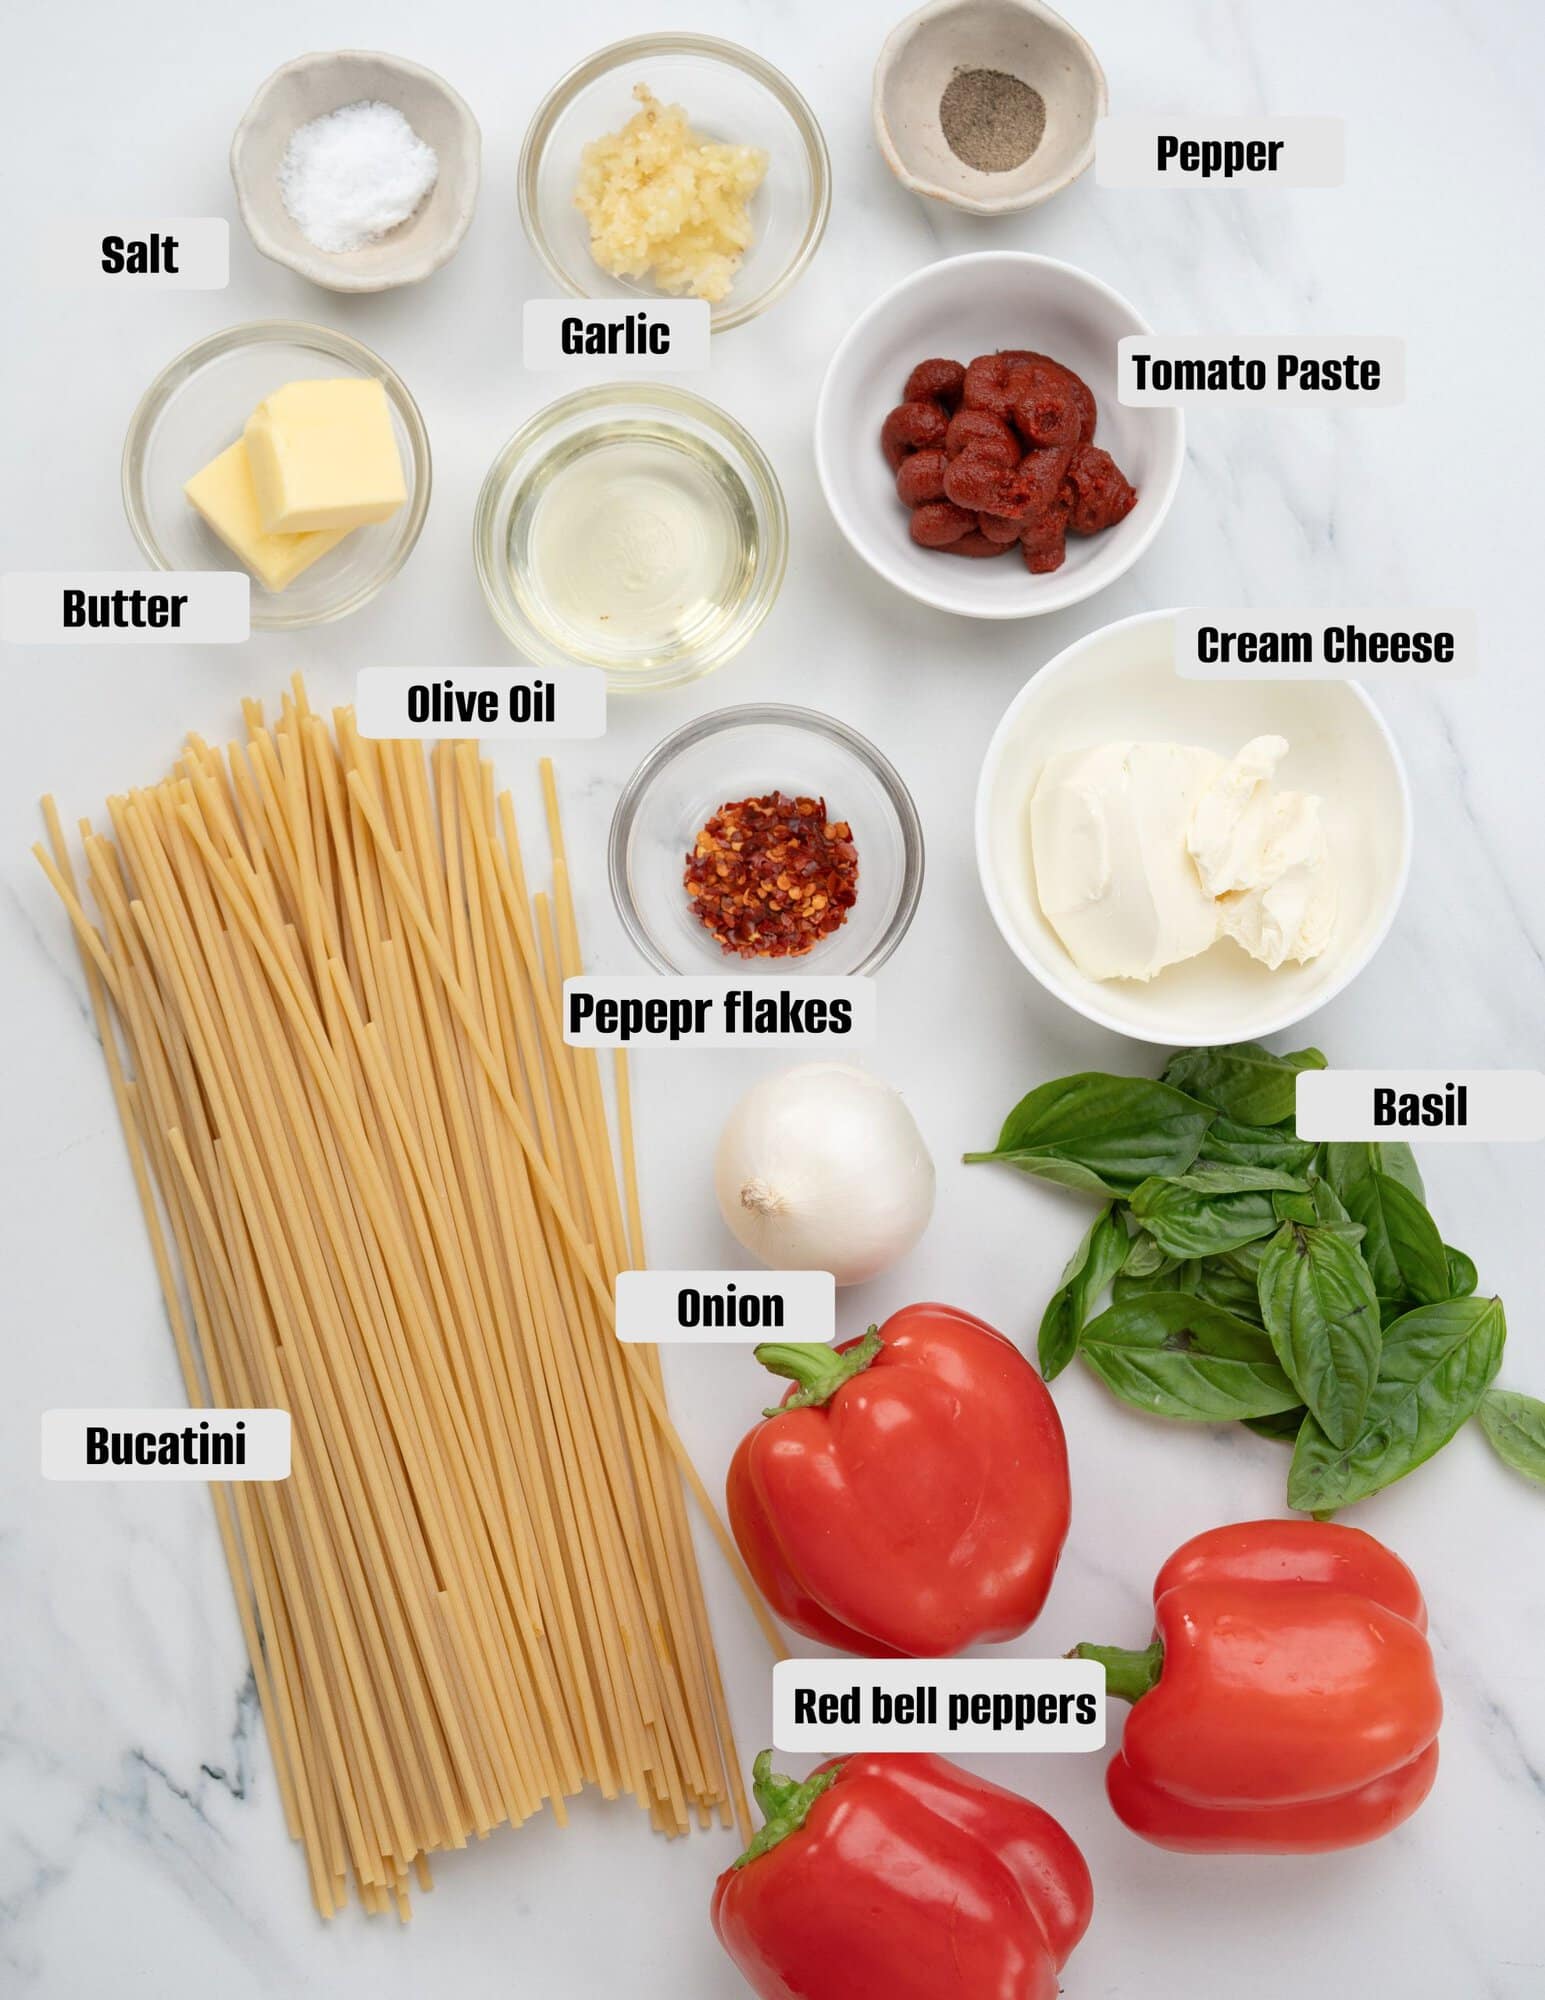 Ingredients image: pasta, red bell peppers, herbs, aromatics, butter, olive oil and cream cheese.